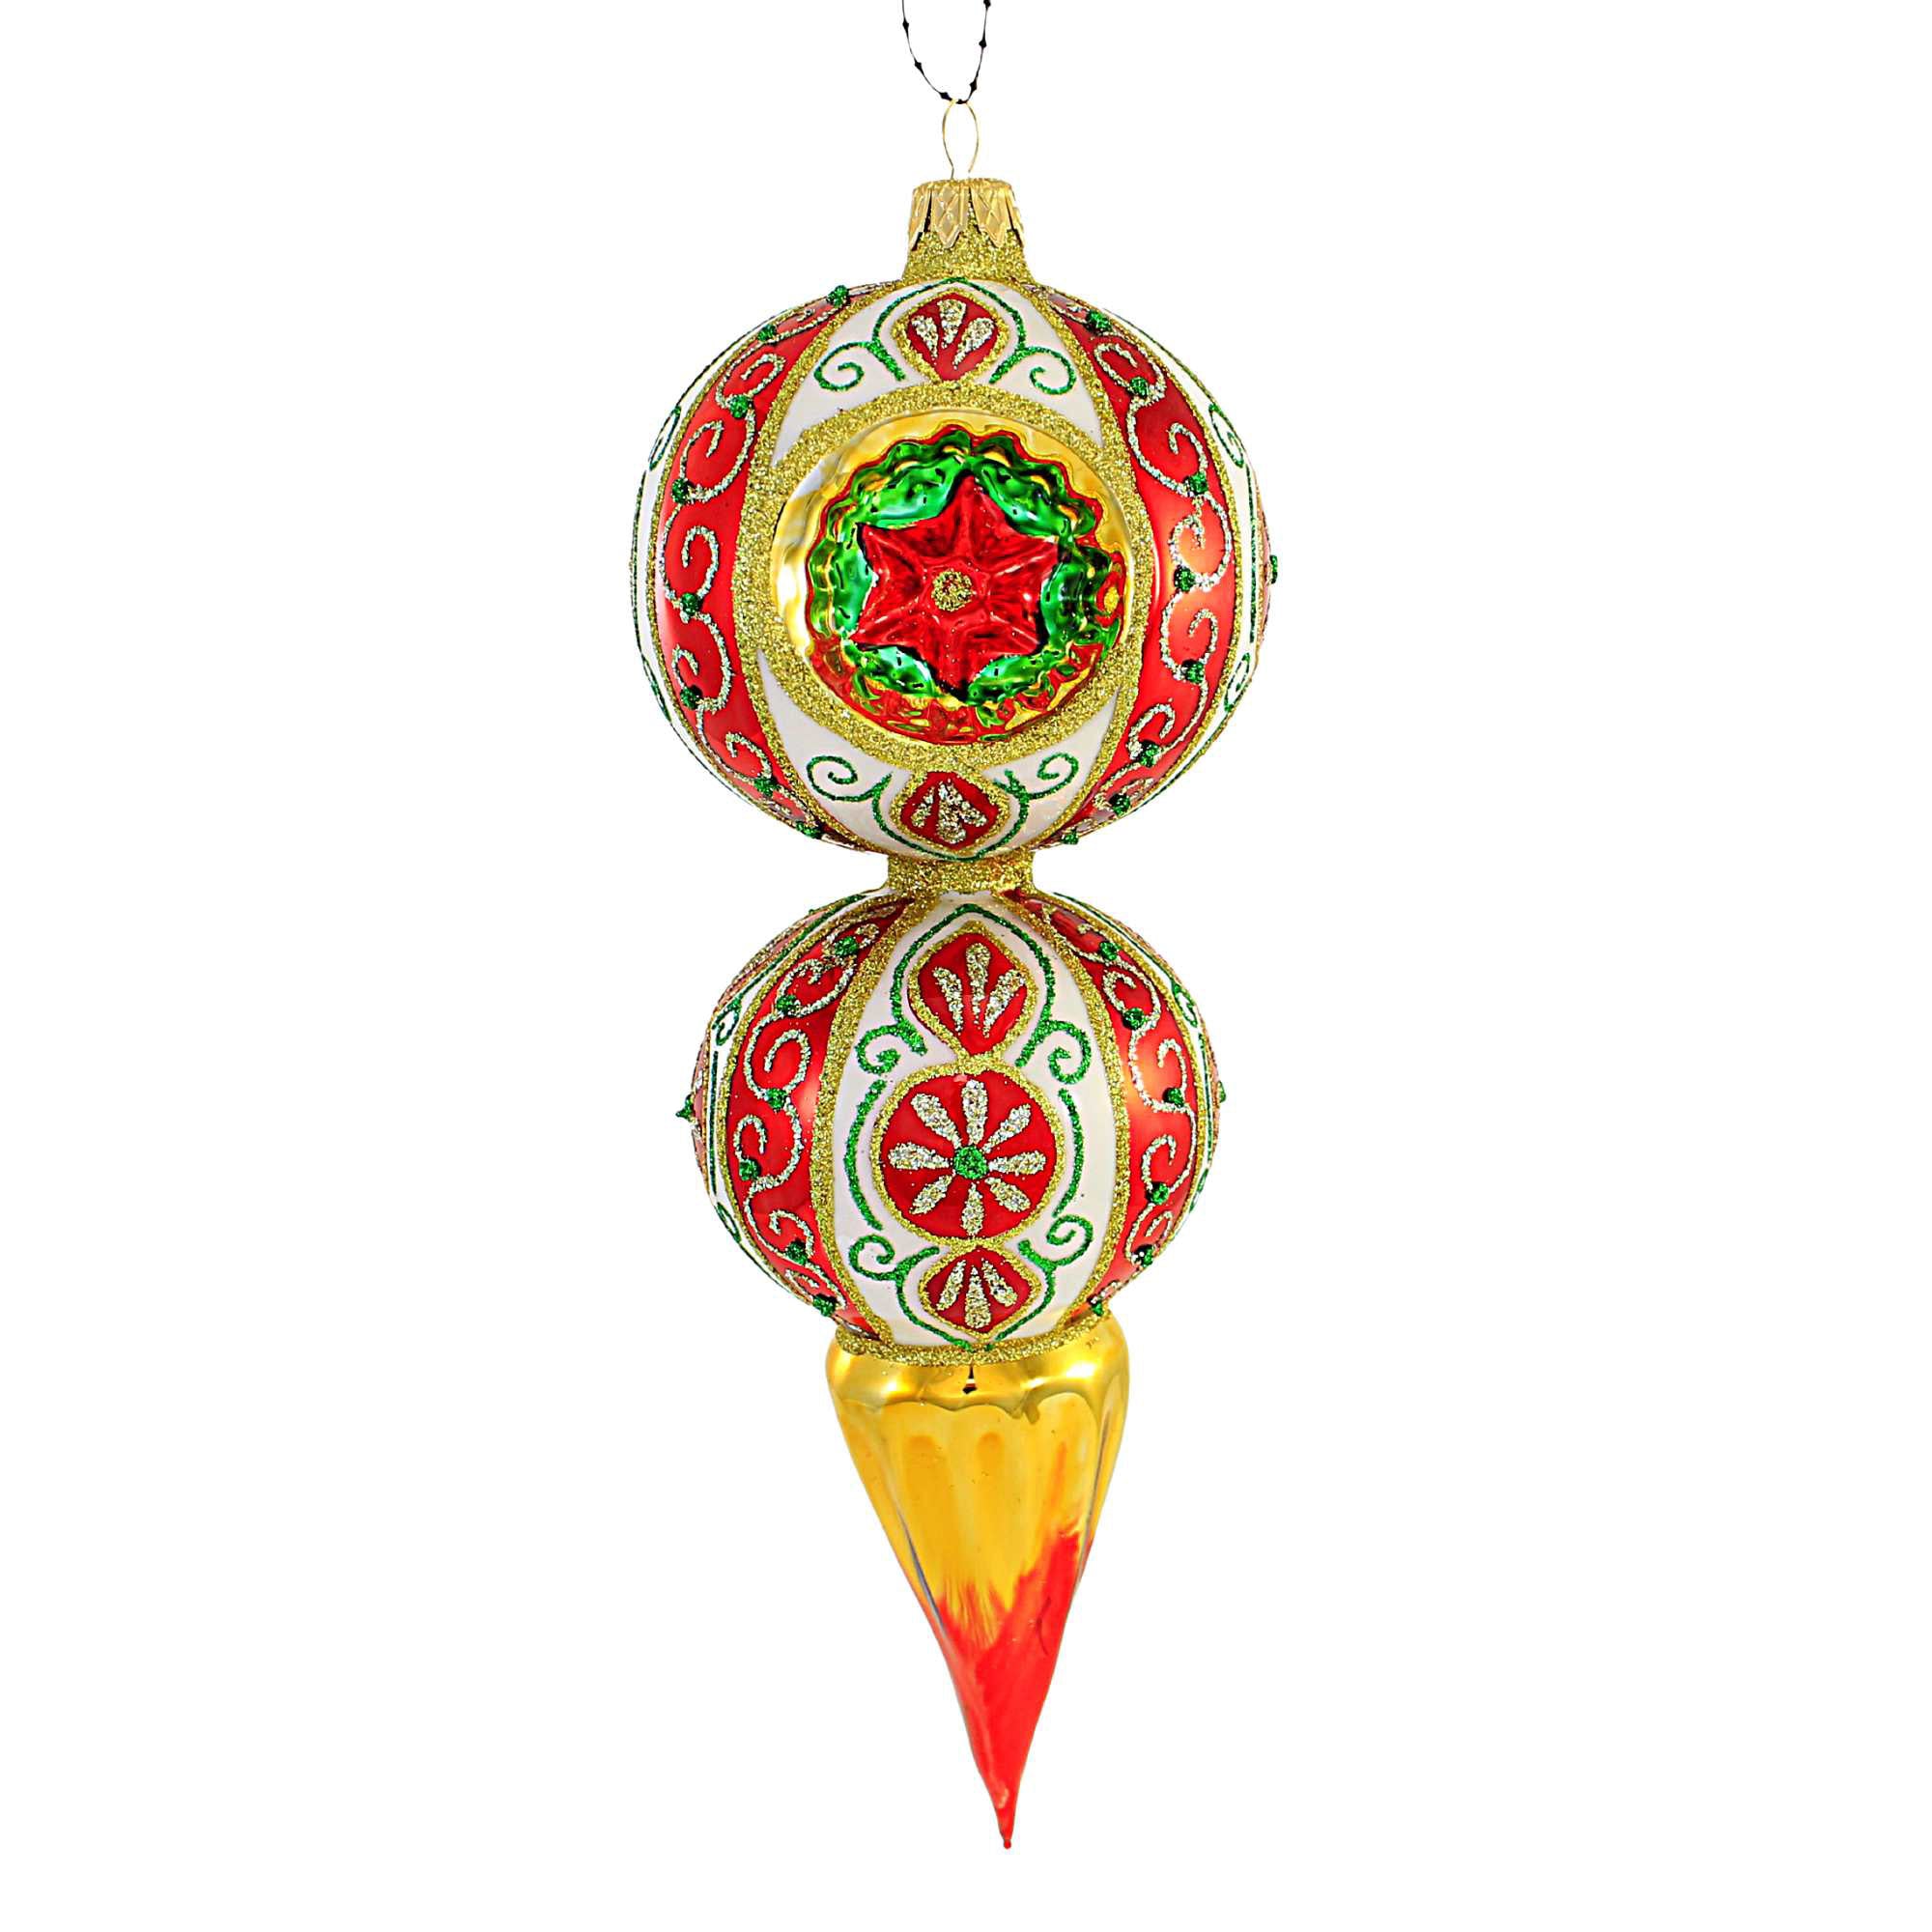 4797 Berlin Sublimation wood ornament w/red ribbon 3.95” x 2.74”, 25 each